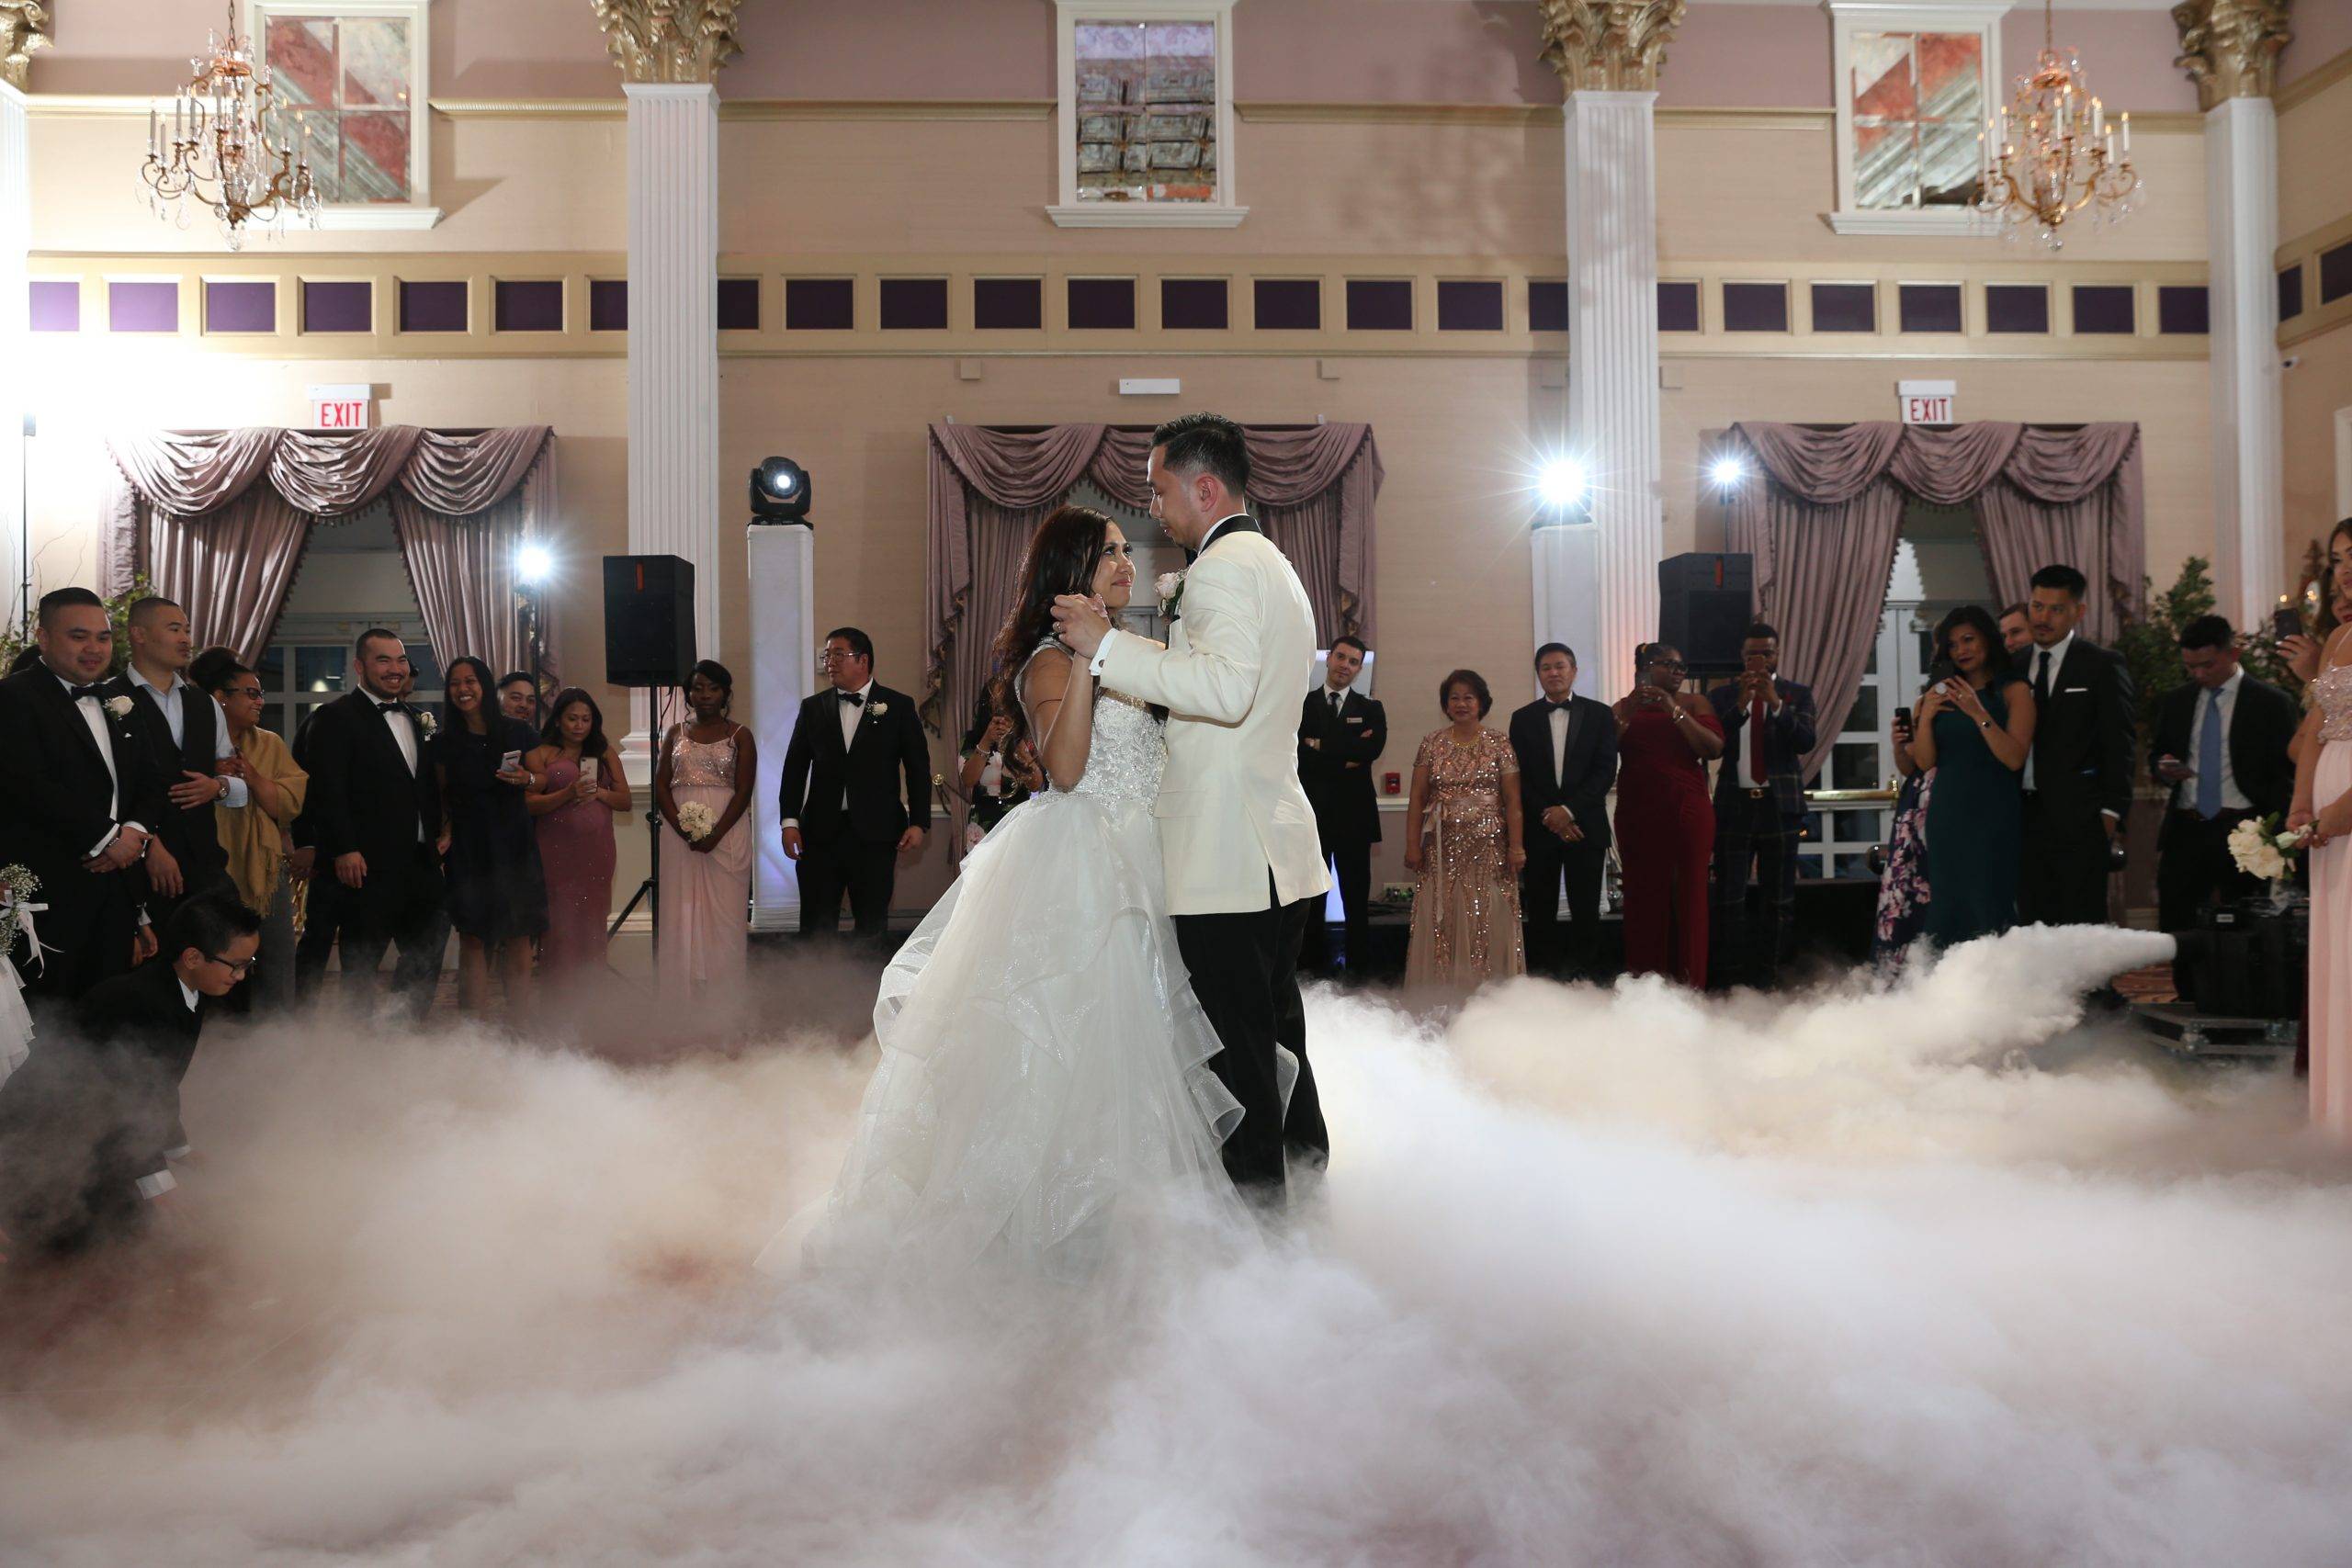 A bride and groom dance in a cloud of smoke.